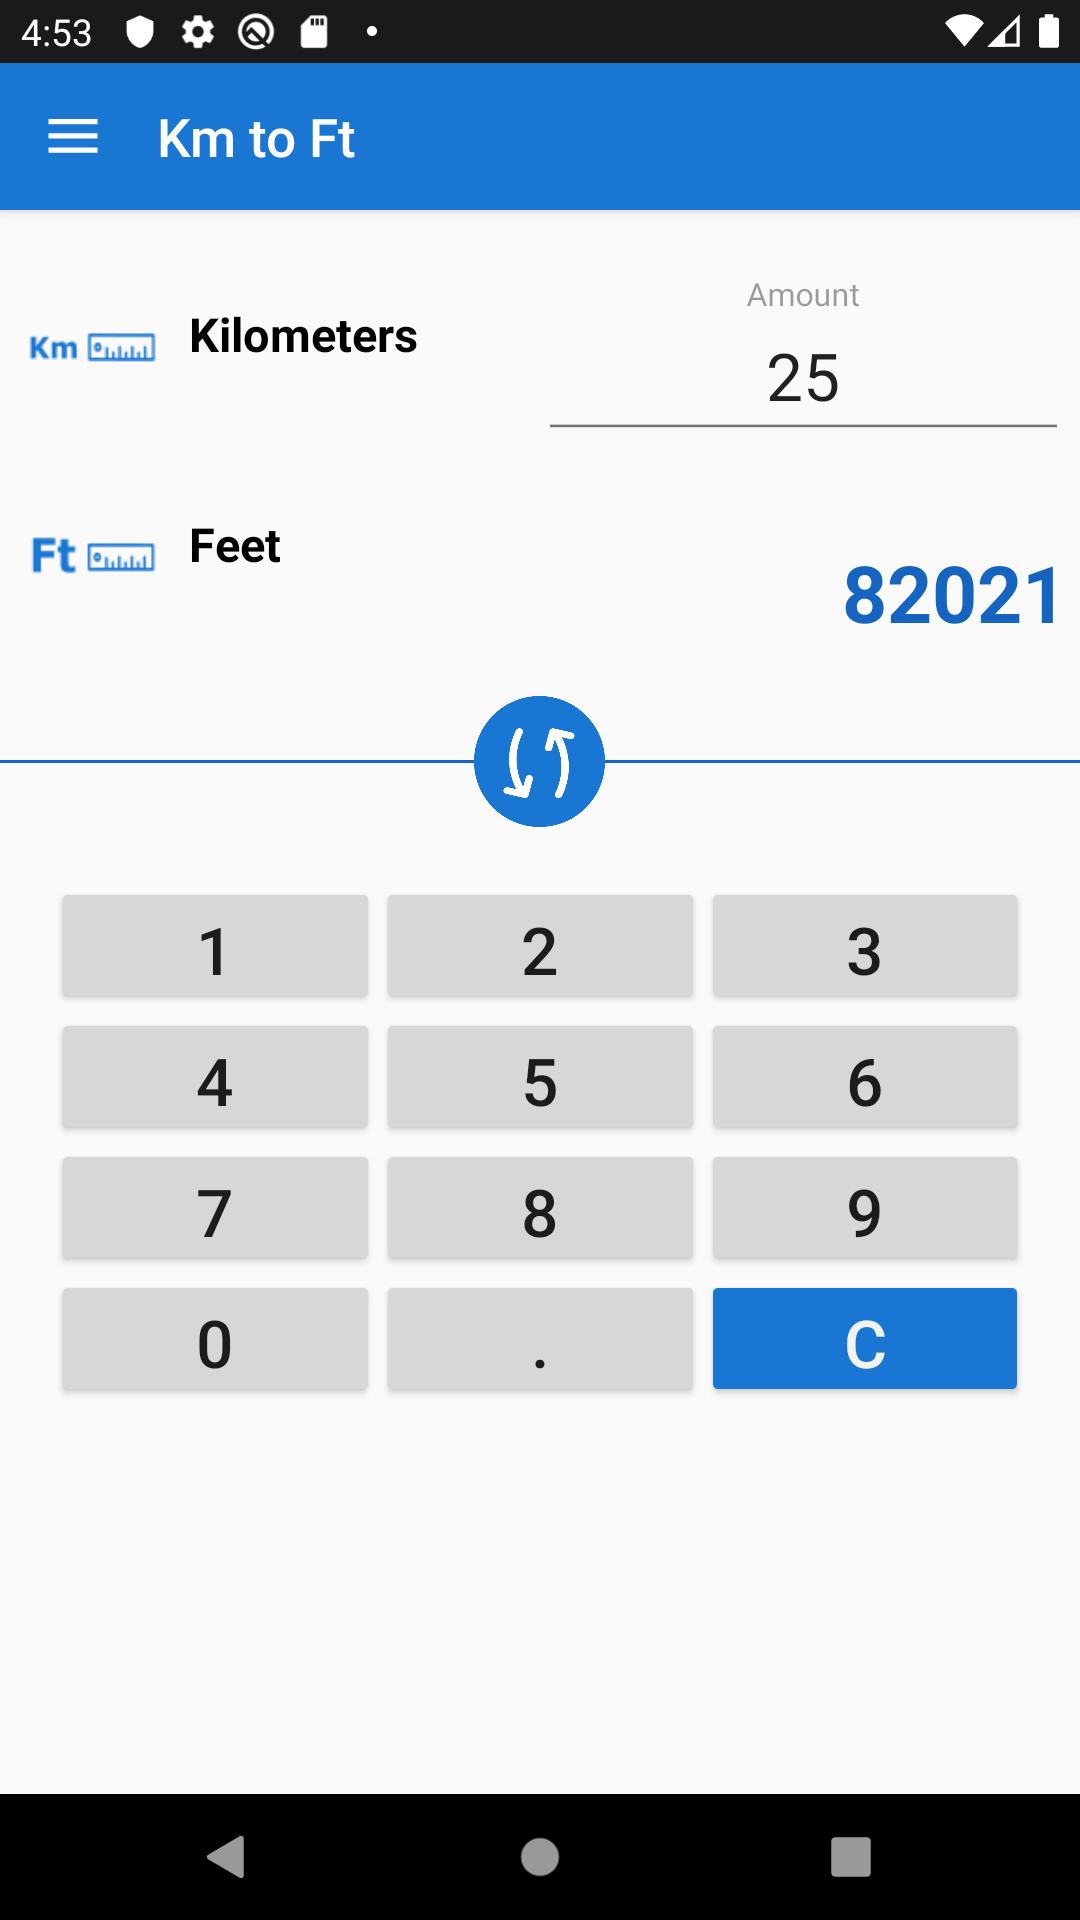 Kilometers to Feet / Km to Ft Converter for Android - APK Download